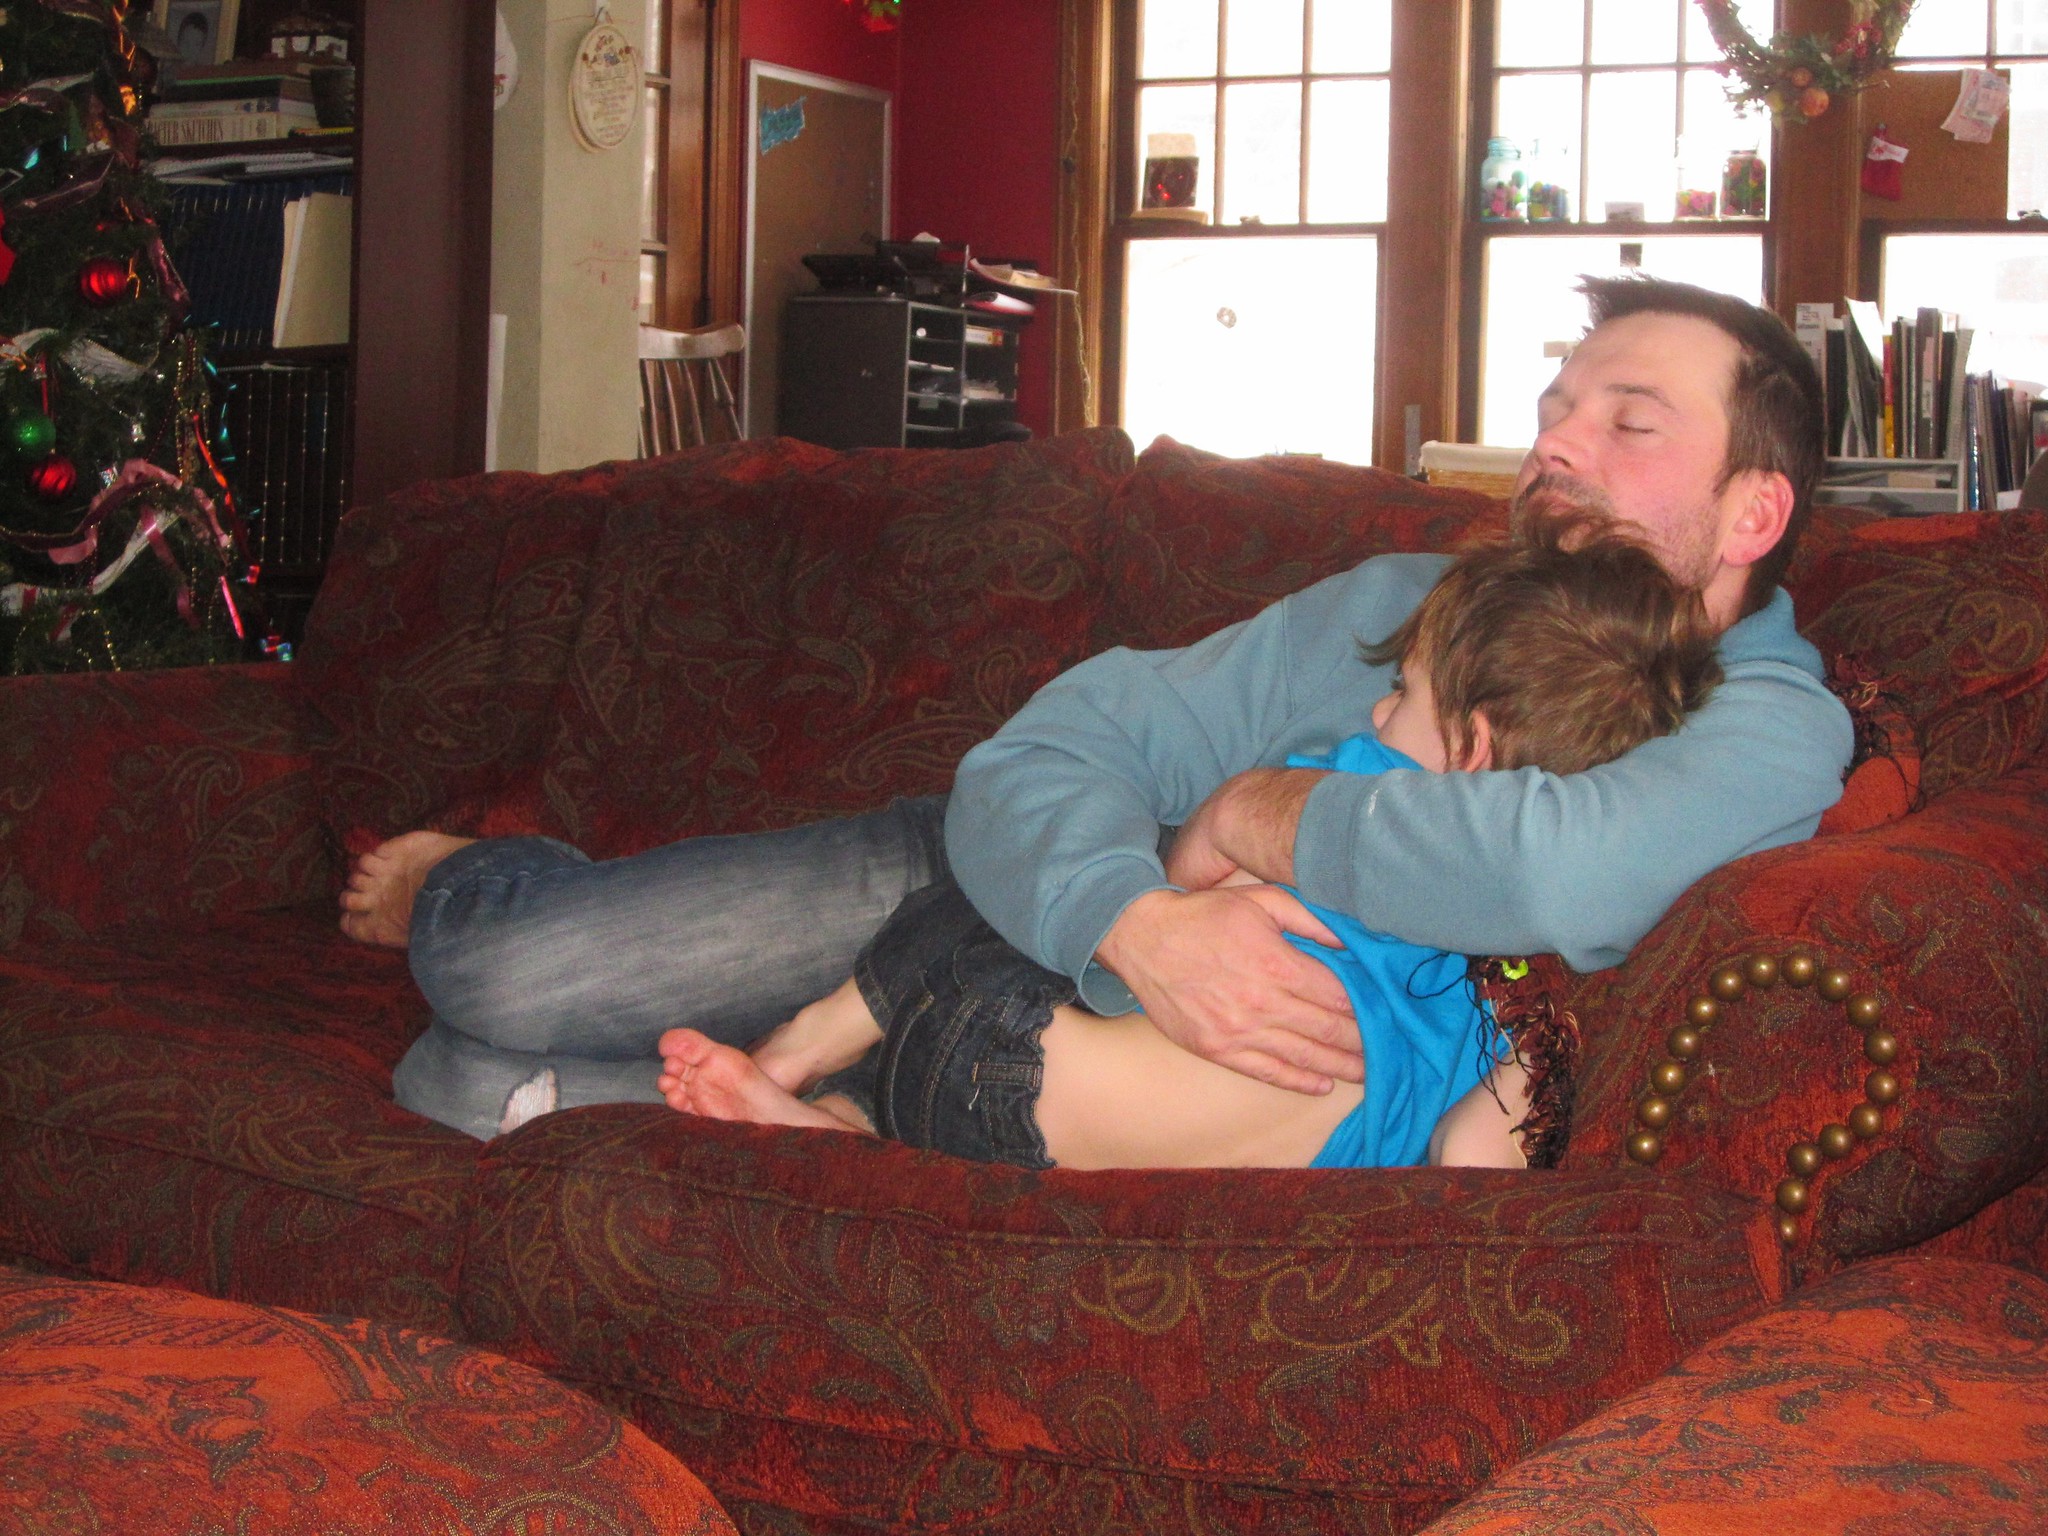 A father hugging his son | Source: Flickr